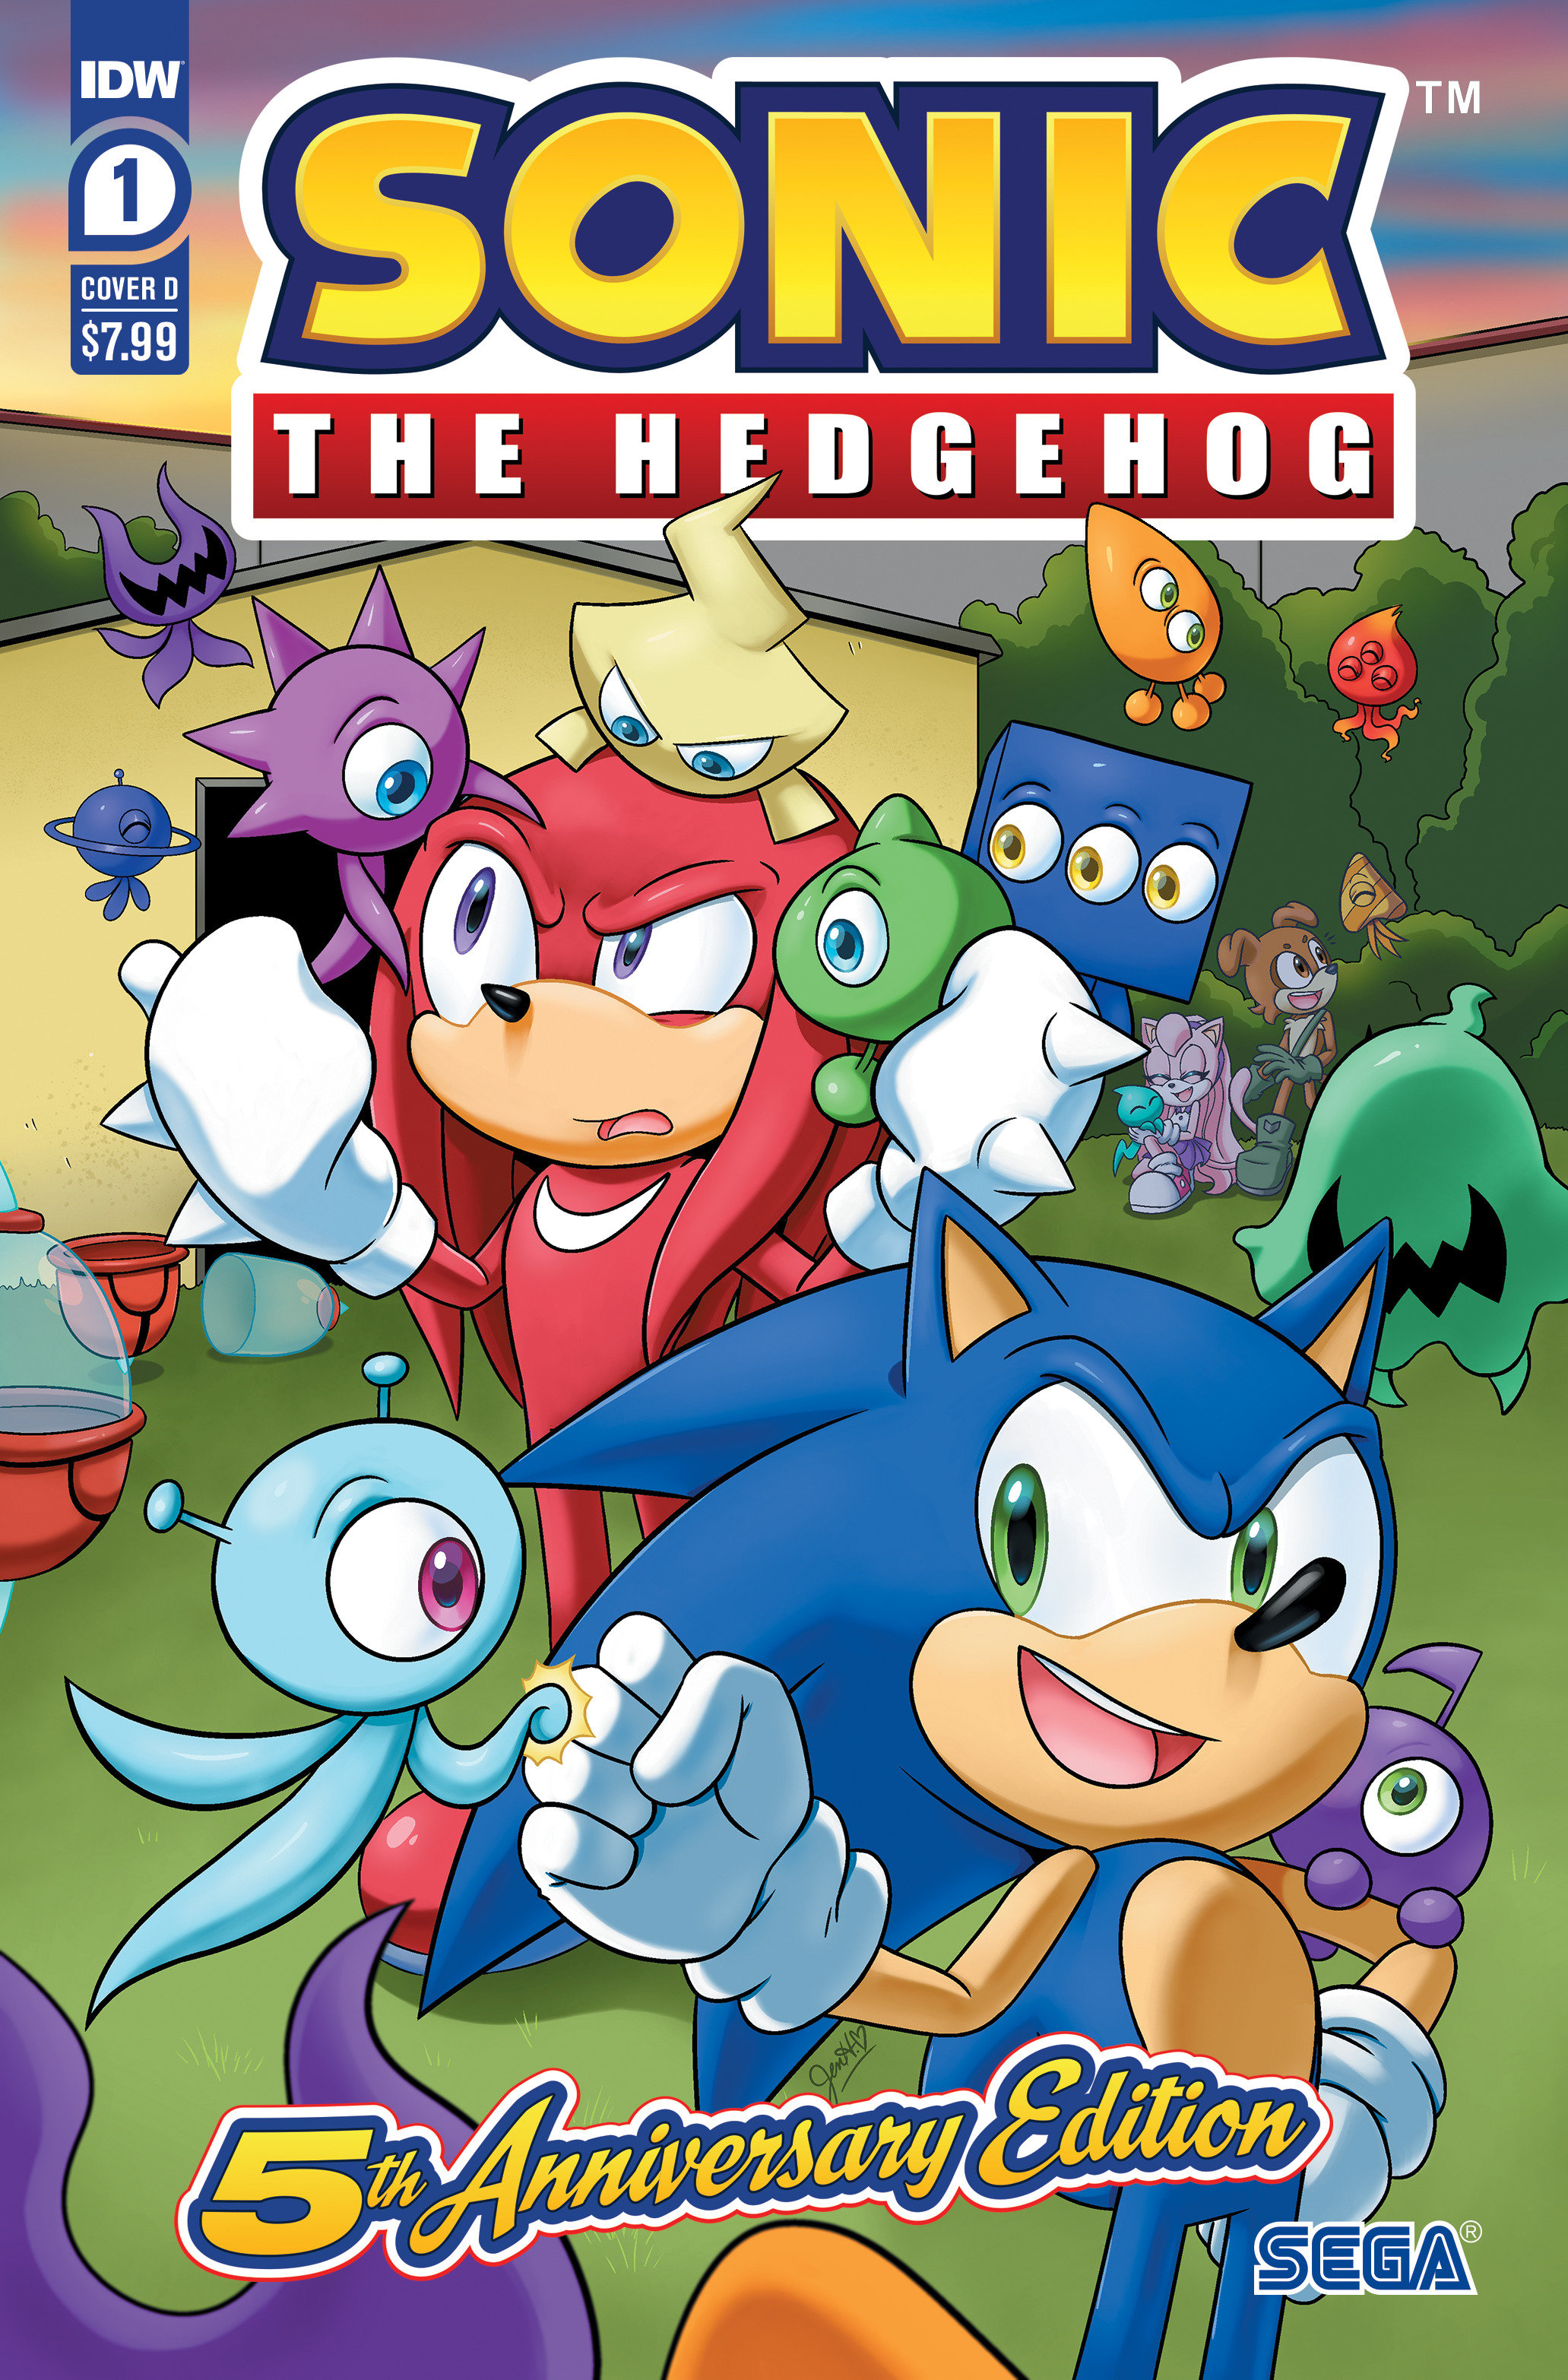 Sonic the Hedgehog #1 5th Anniversary Edition Cover D Hernandez